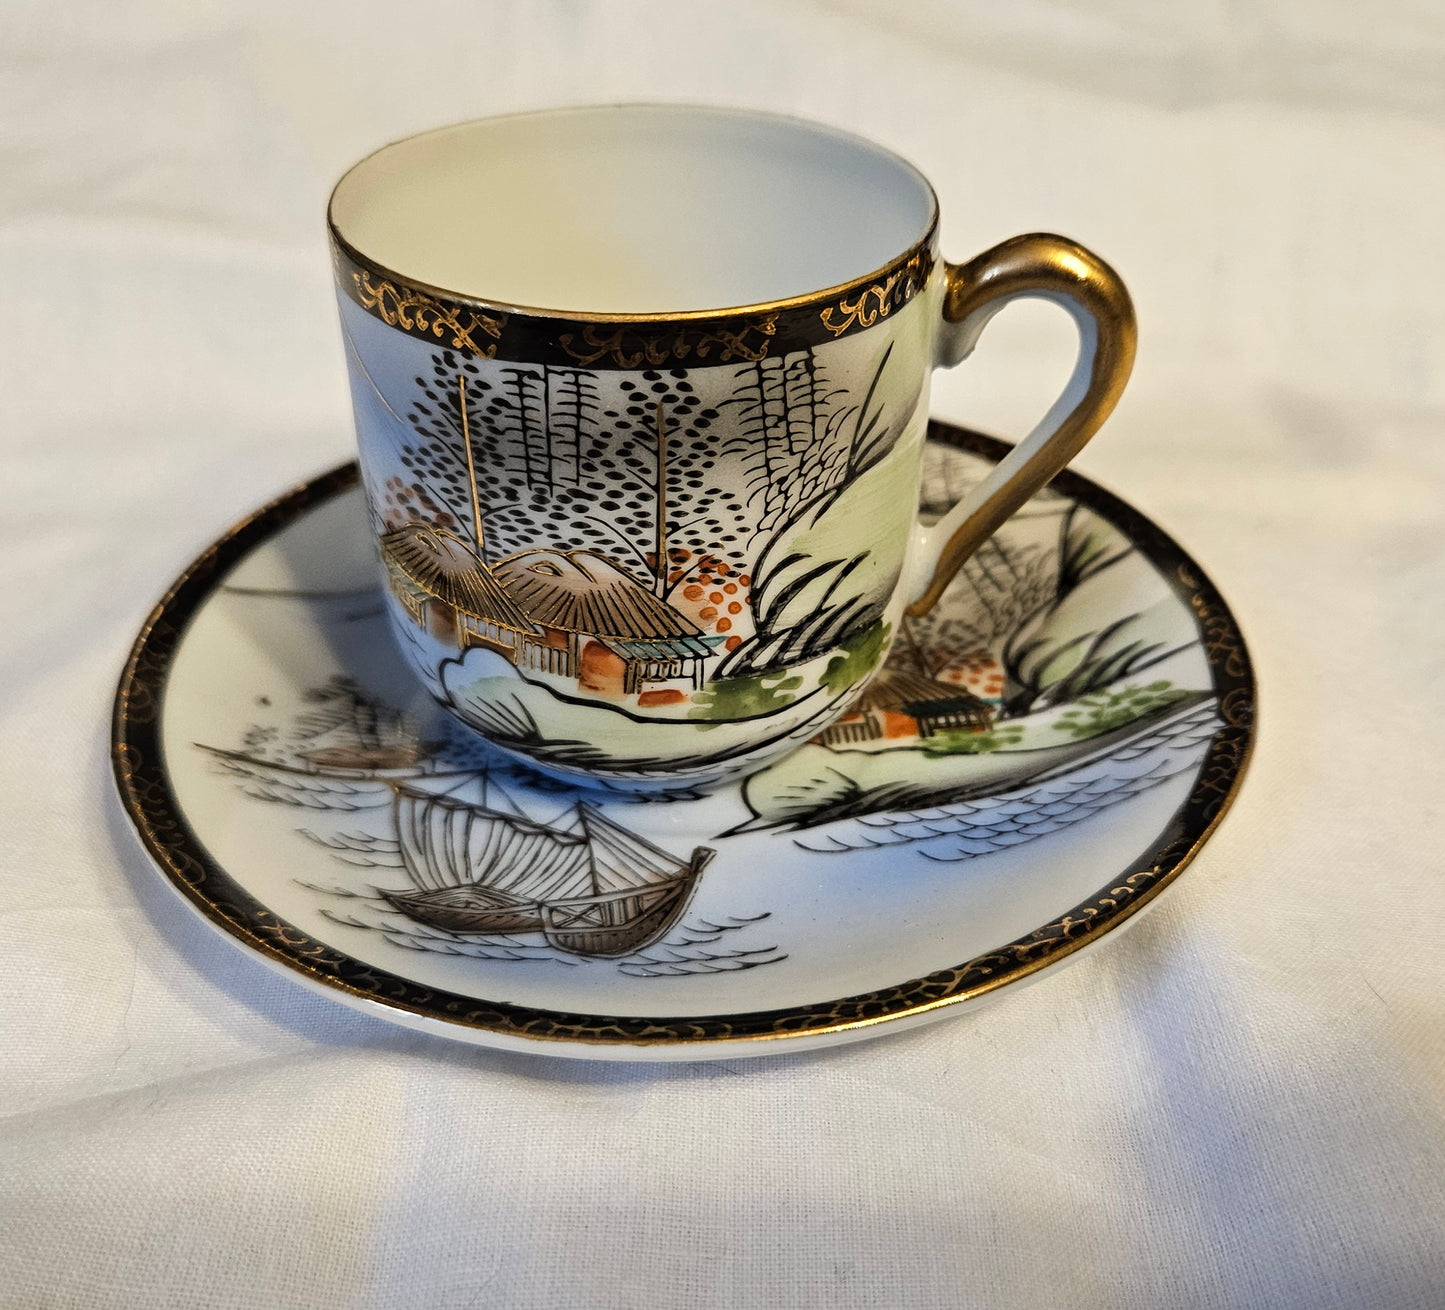 Vintage Japanese lithophane teacup and saucer with image of woman on bottom of cup